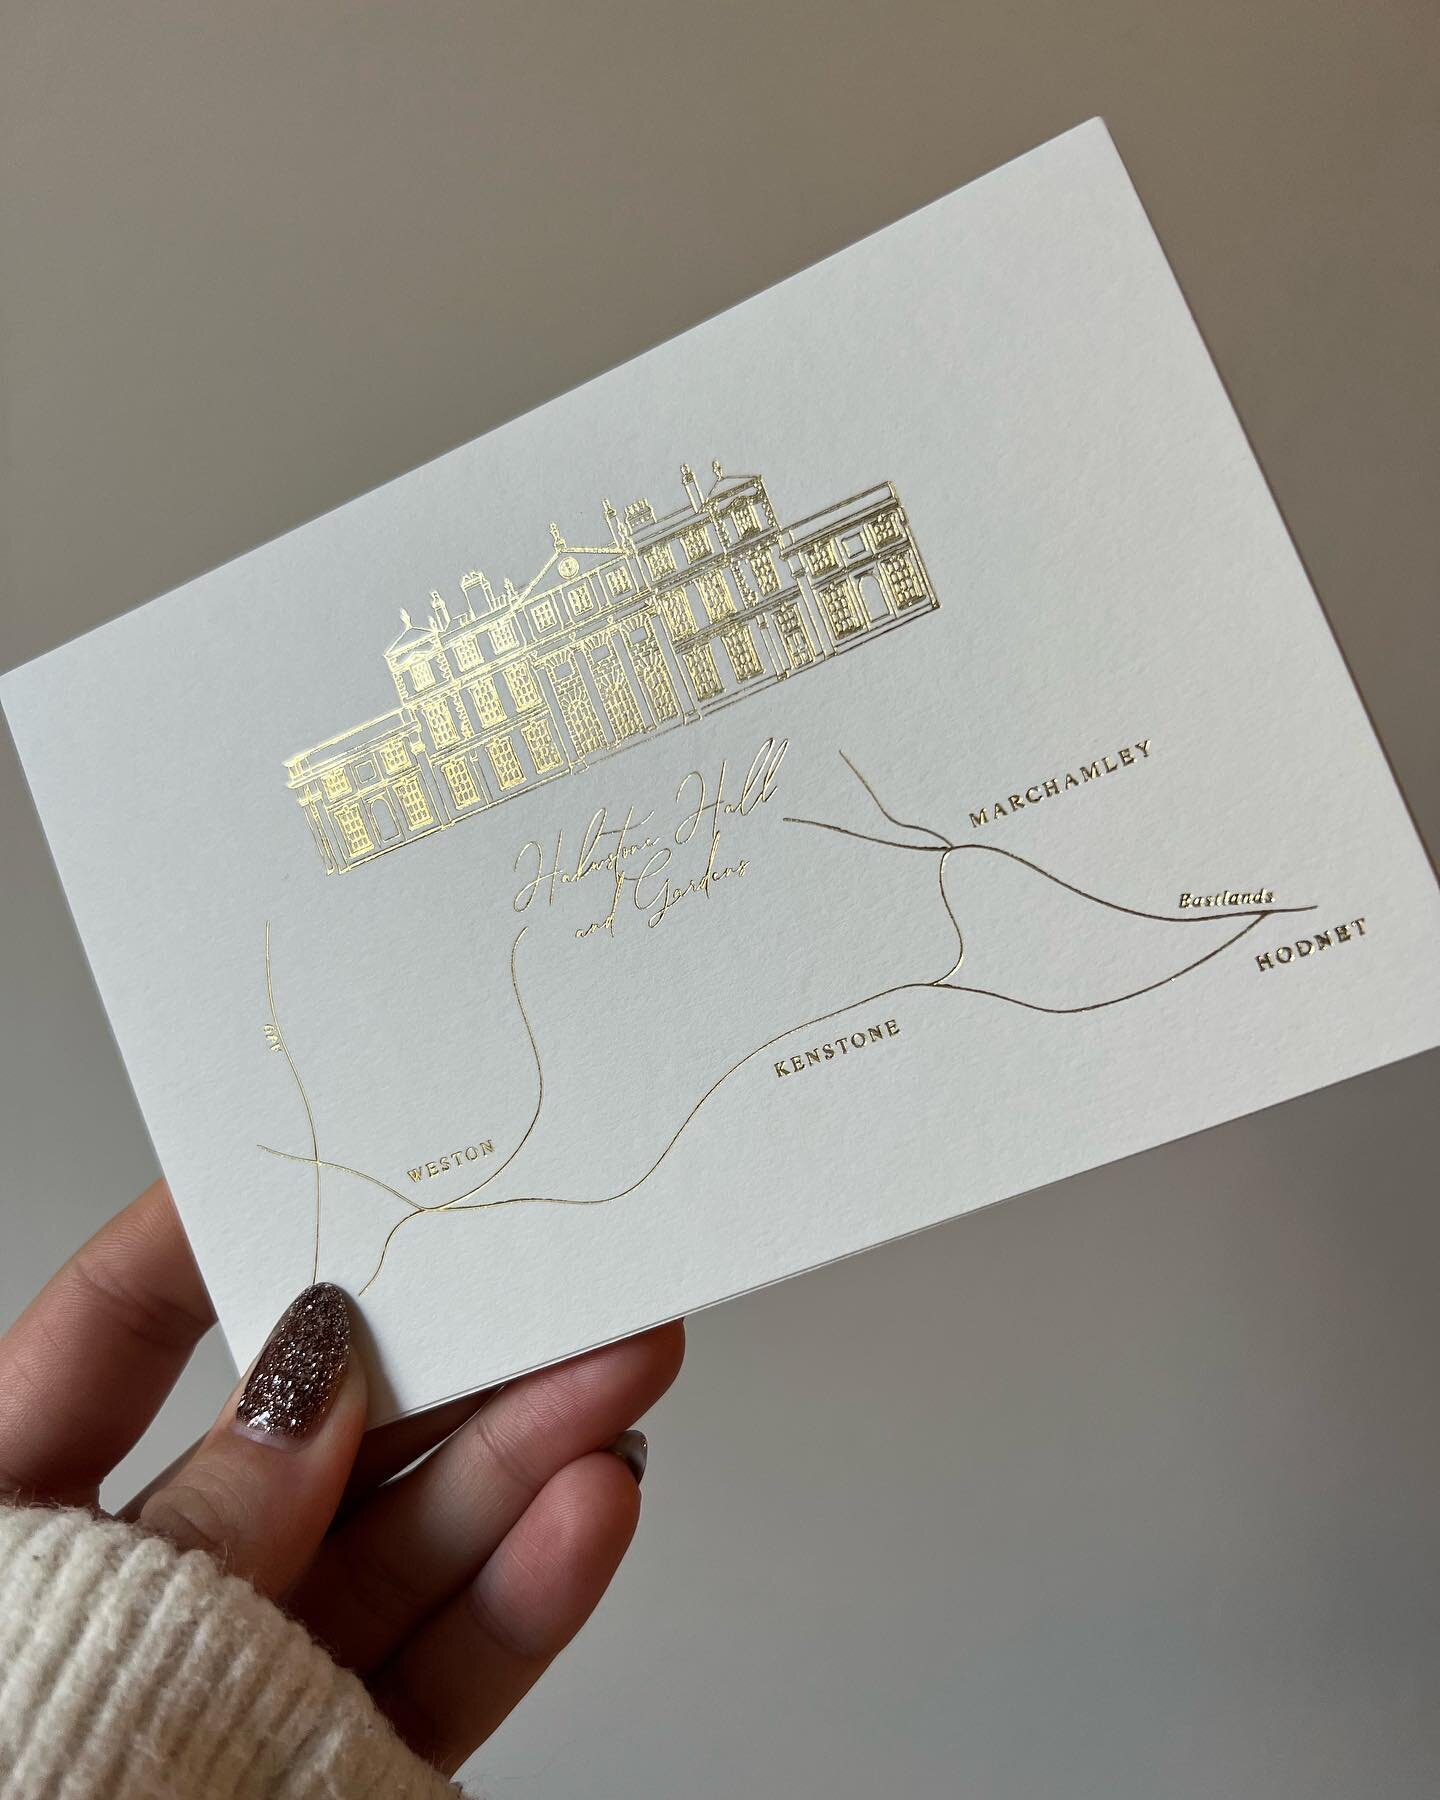 Hot foiled map with venue illustration for J&amp;K
.
.
.
#venueillustration #map #hotfoil #hotfoilprinting #goldfoil #goldfoilstationery #foilco #hotfoilstamping #hawkstonehall #weddingstationery #hawkstonehallwedding #weddingstationerydesign